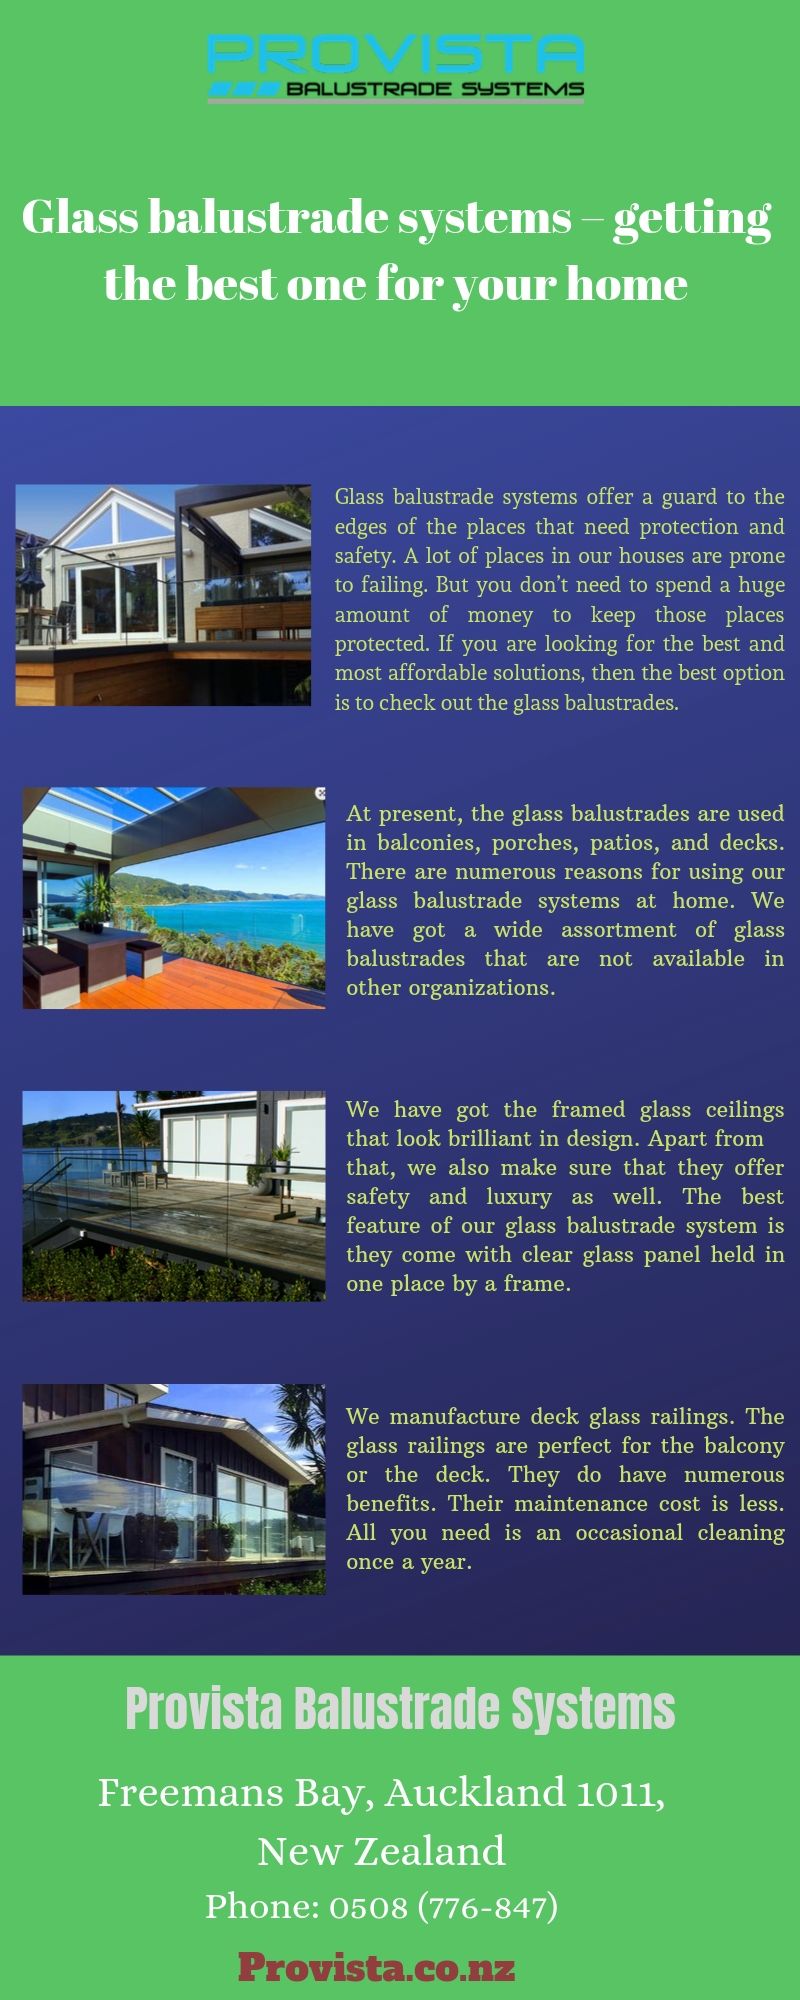 Glass balustrade systems – getting the best one for your home 

At present, the glass balustrades are used in balconies, porches, patios, and decks. There are numerous reasons for using our glass balustrade systems at home. For more details, visit this link: https://bit.ly/2oTnBsx by Provista